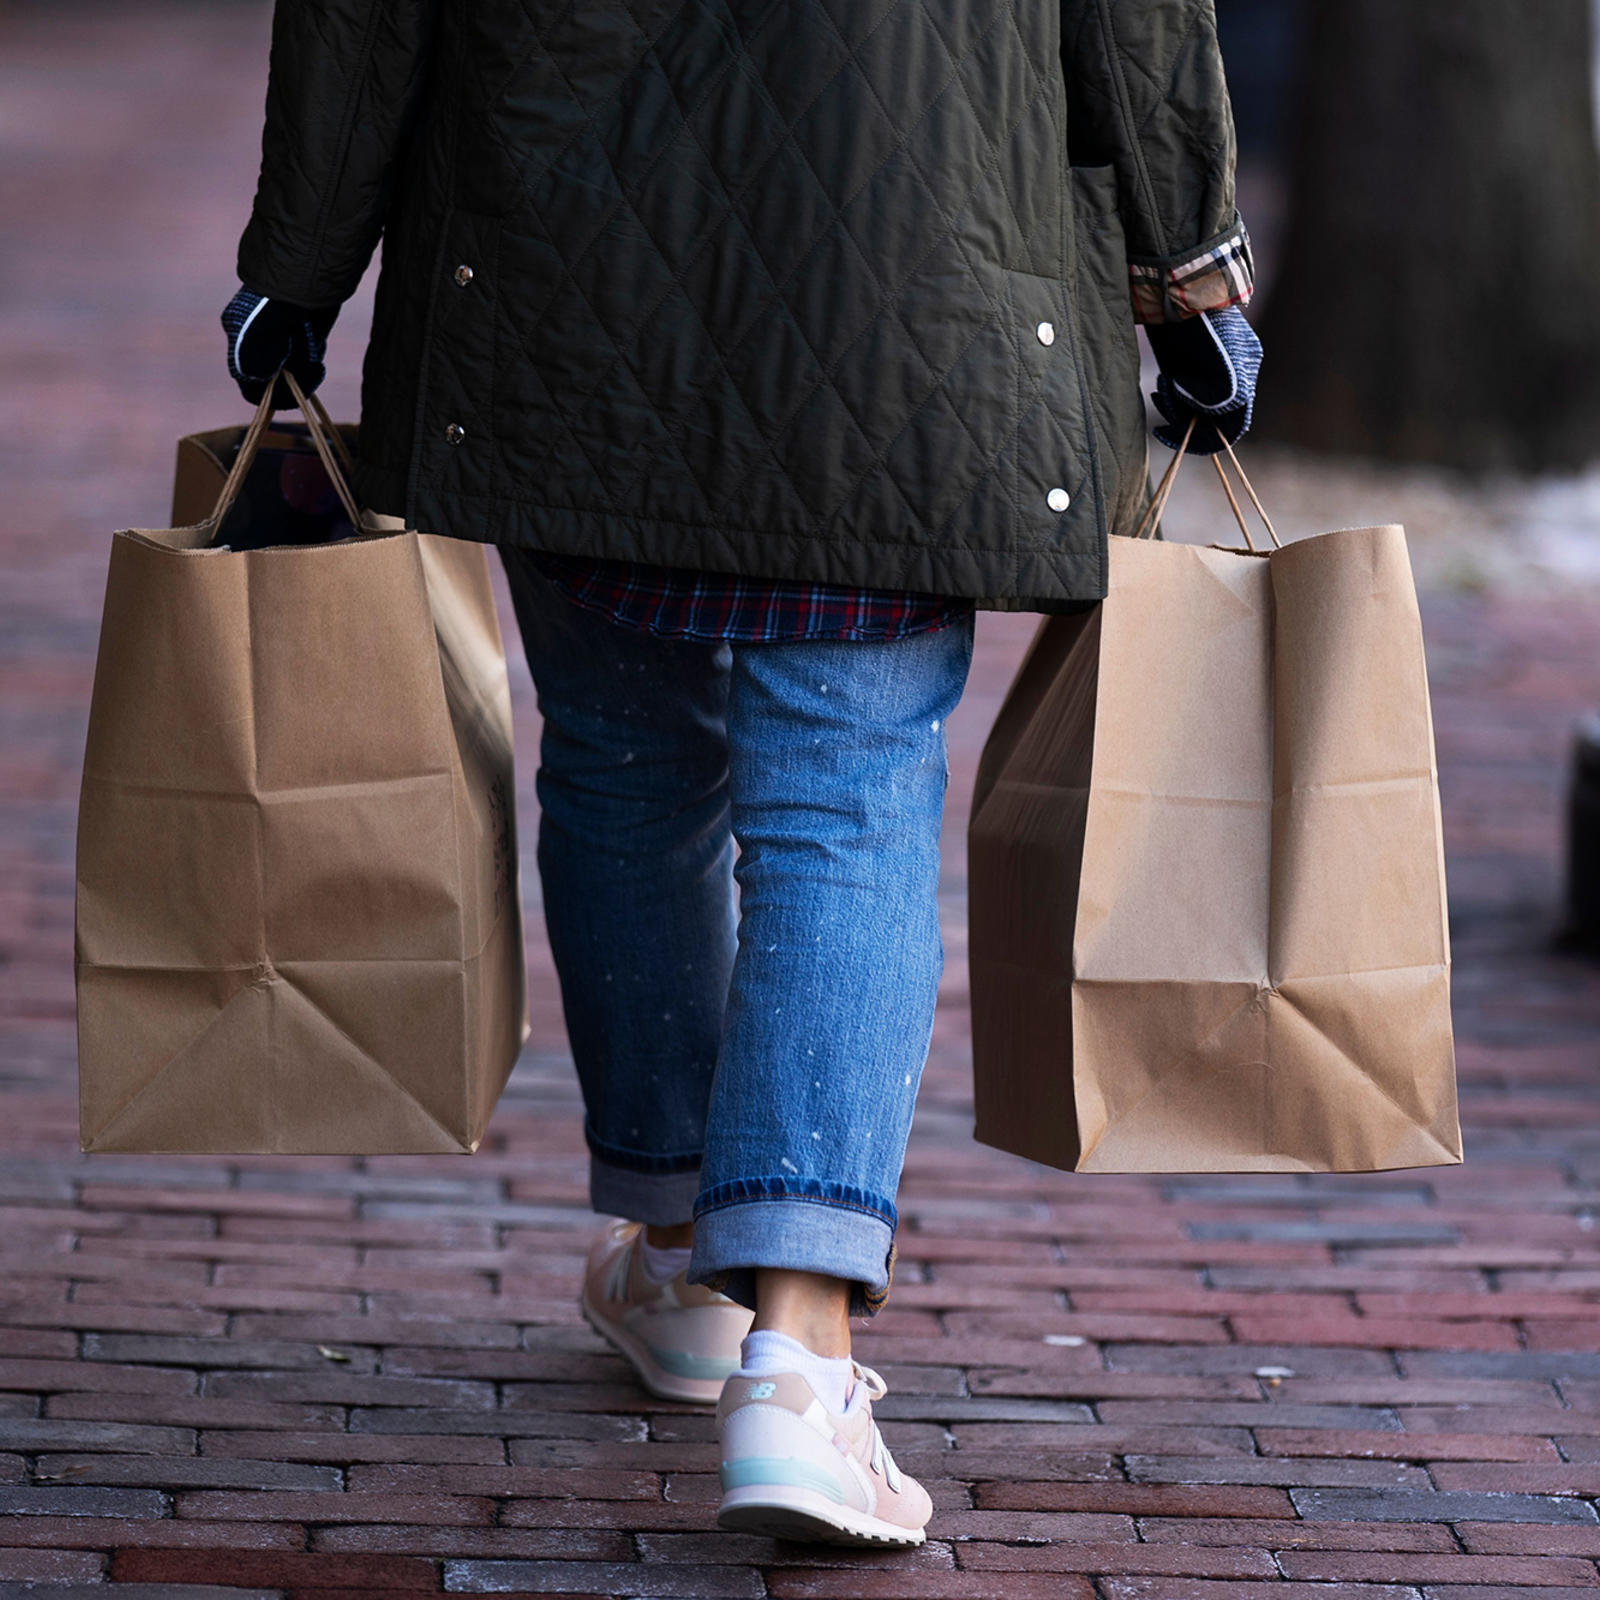 u.s. inflation higher than expected in december as food and rent rise